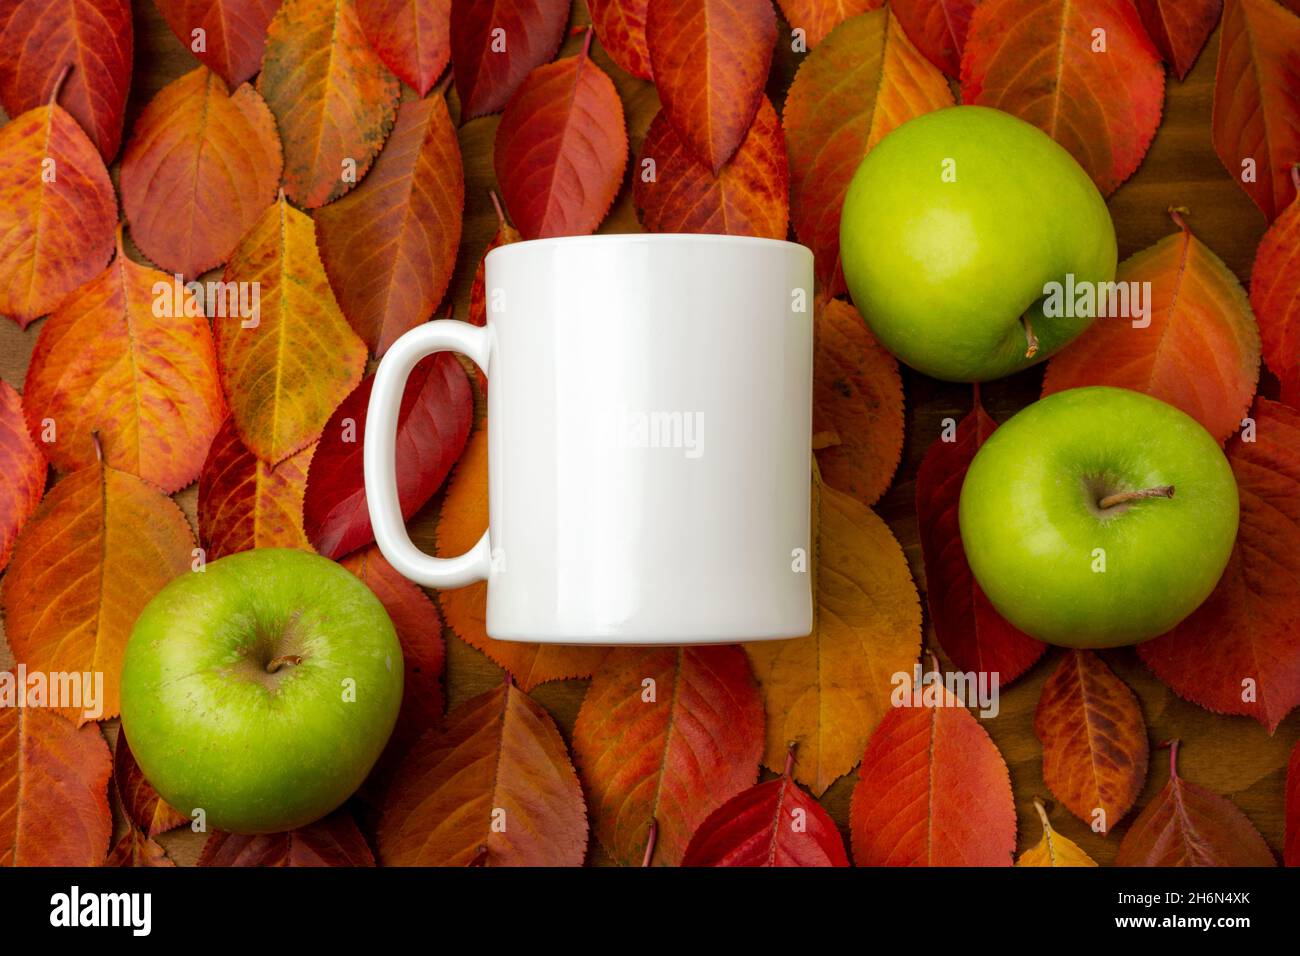 White coffee mug on the red yellow fall leaves background mockup with green apples. Empty mug mock up for design promotion, styled template Stock Photo